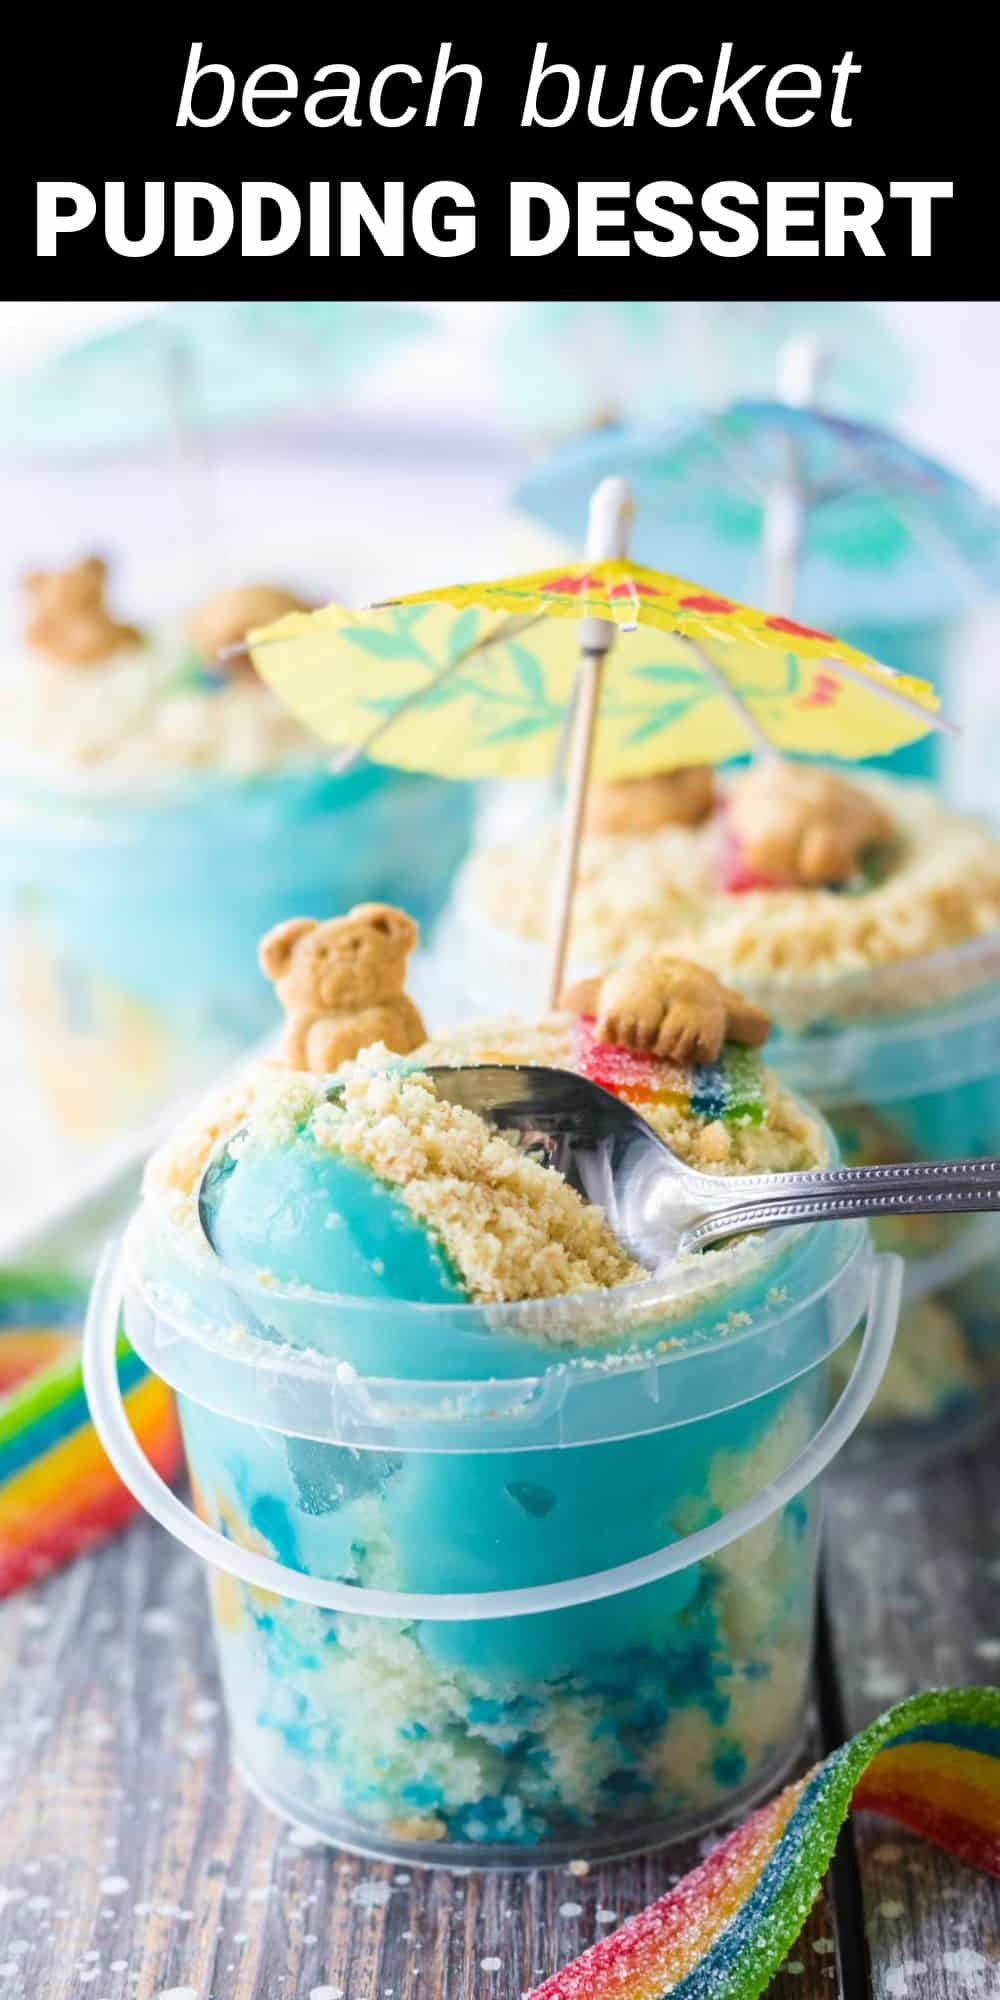 This sand bucket dessert is the cutest treat for all your summer parties. The whole family will have a great time creating this fun summer beach scene made with pudding and cake!